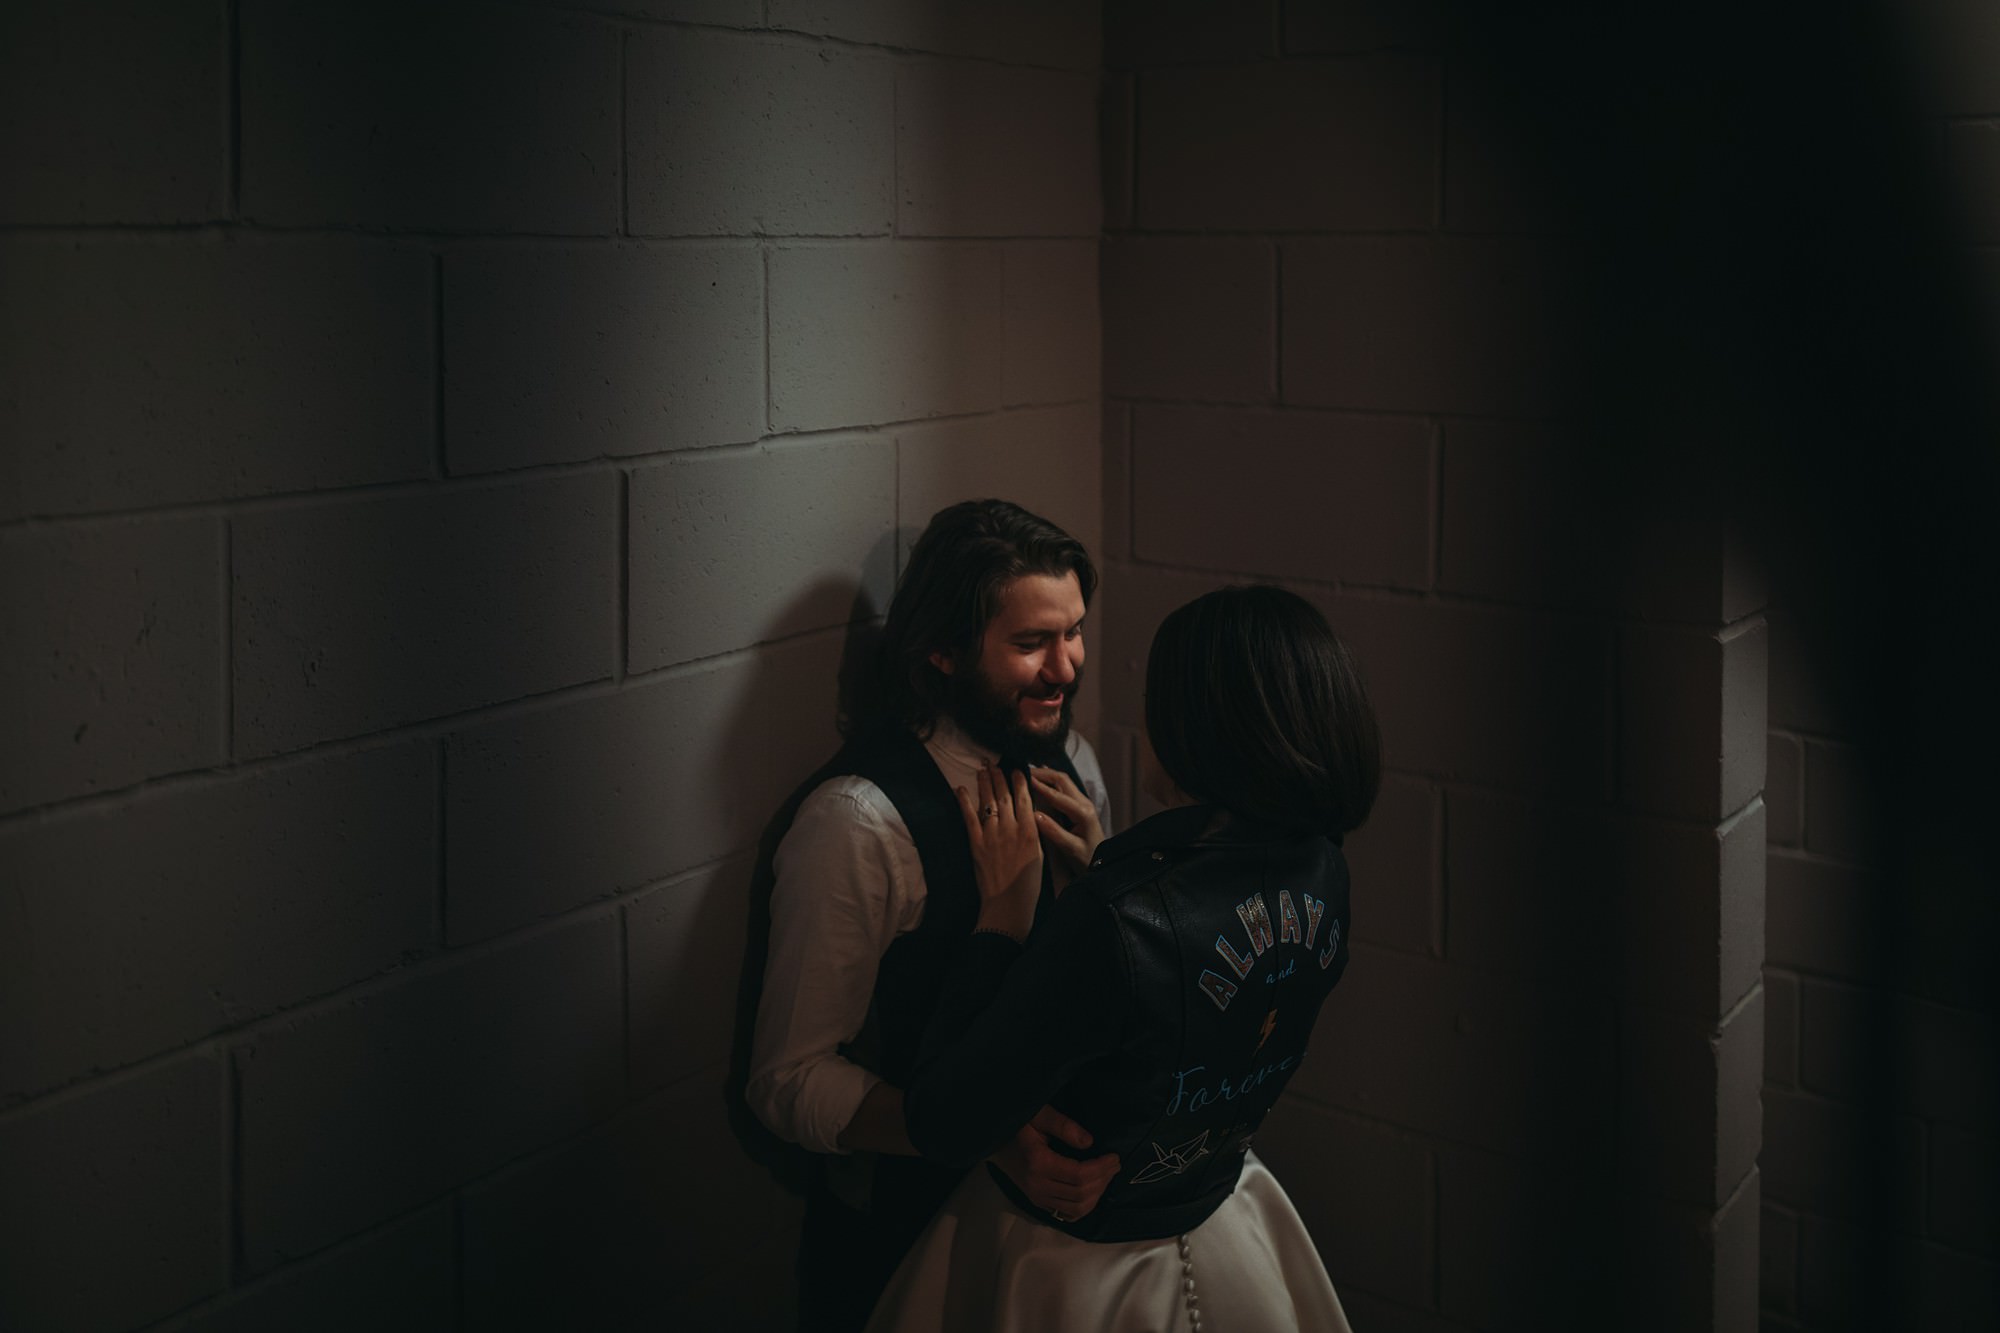 WEST Brewery Wedding | Glasgow Photography + Video Fusion